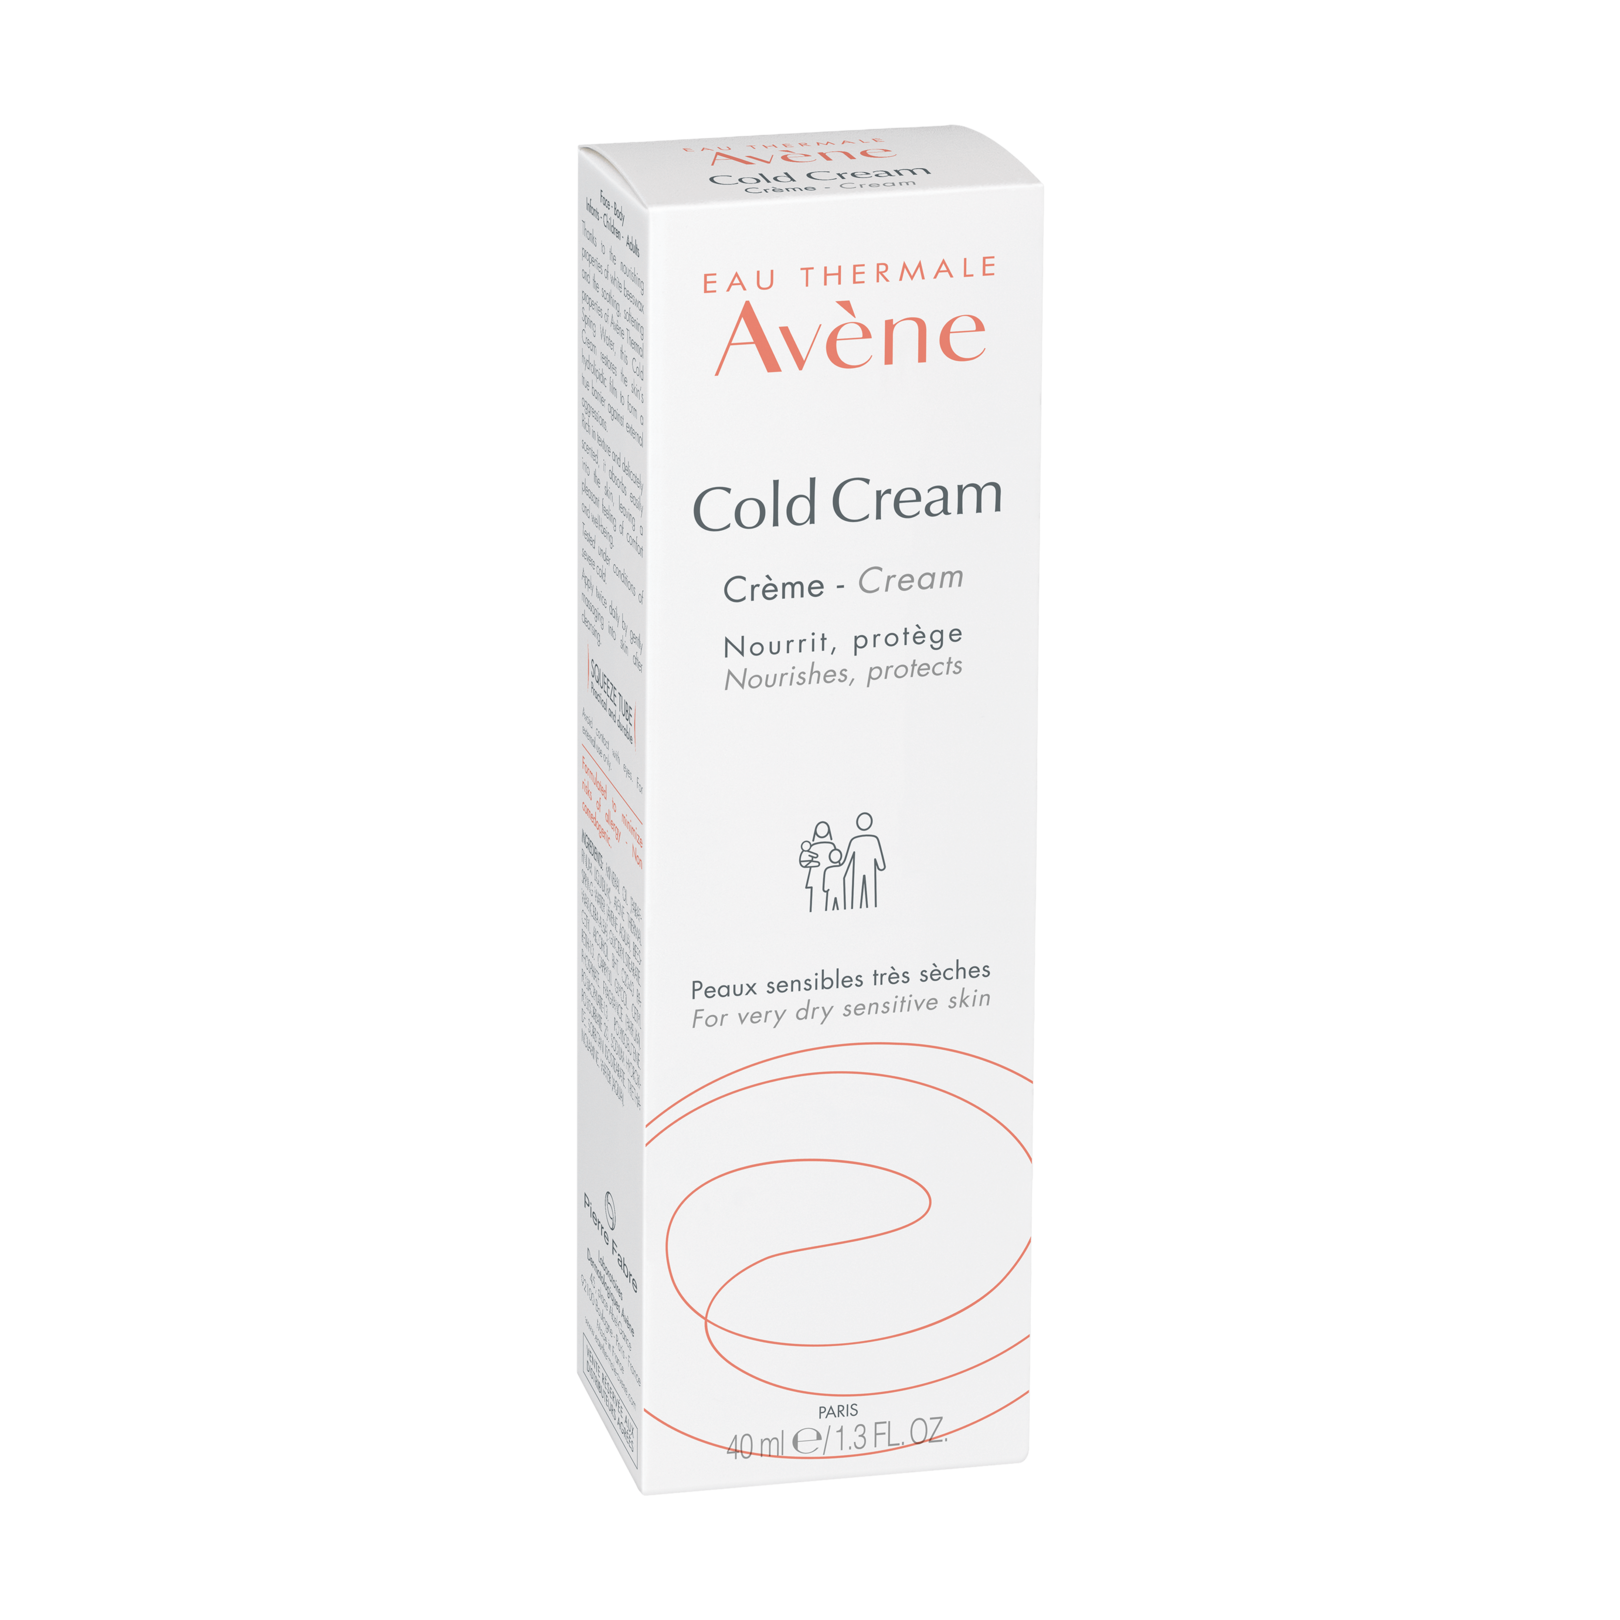 Cold Cream, nourishes, protects and soothes